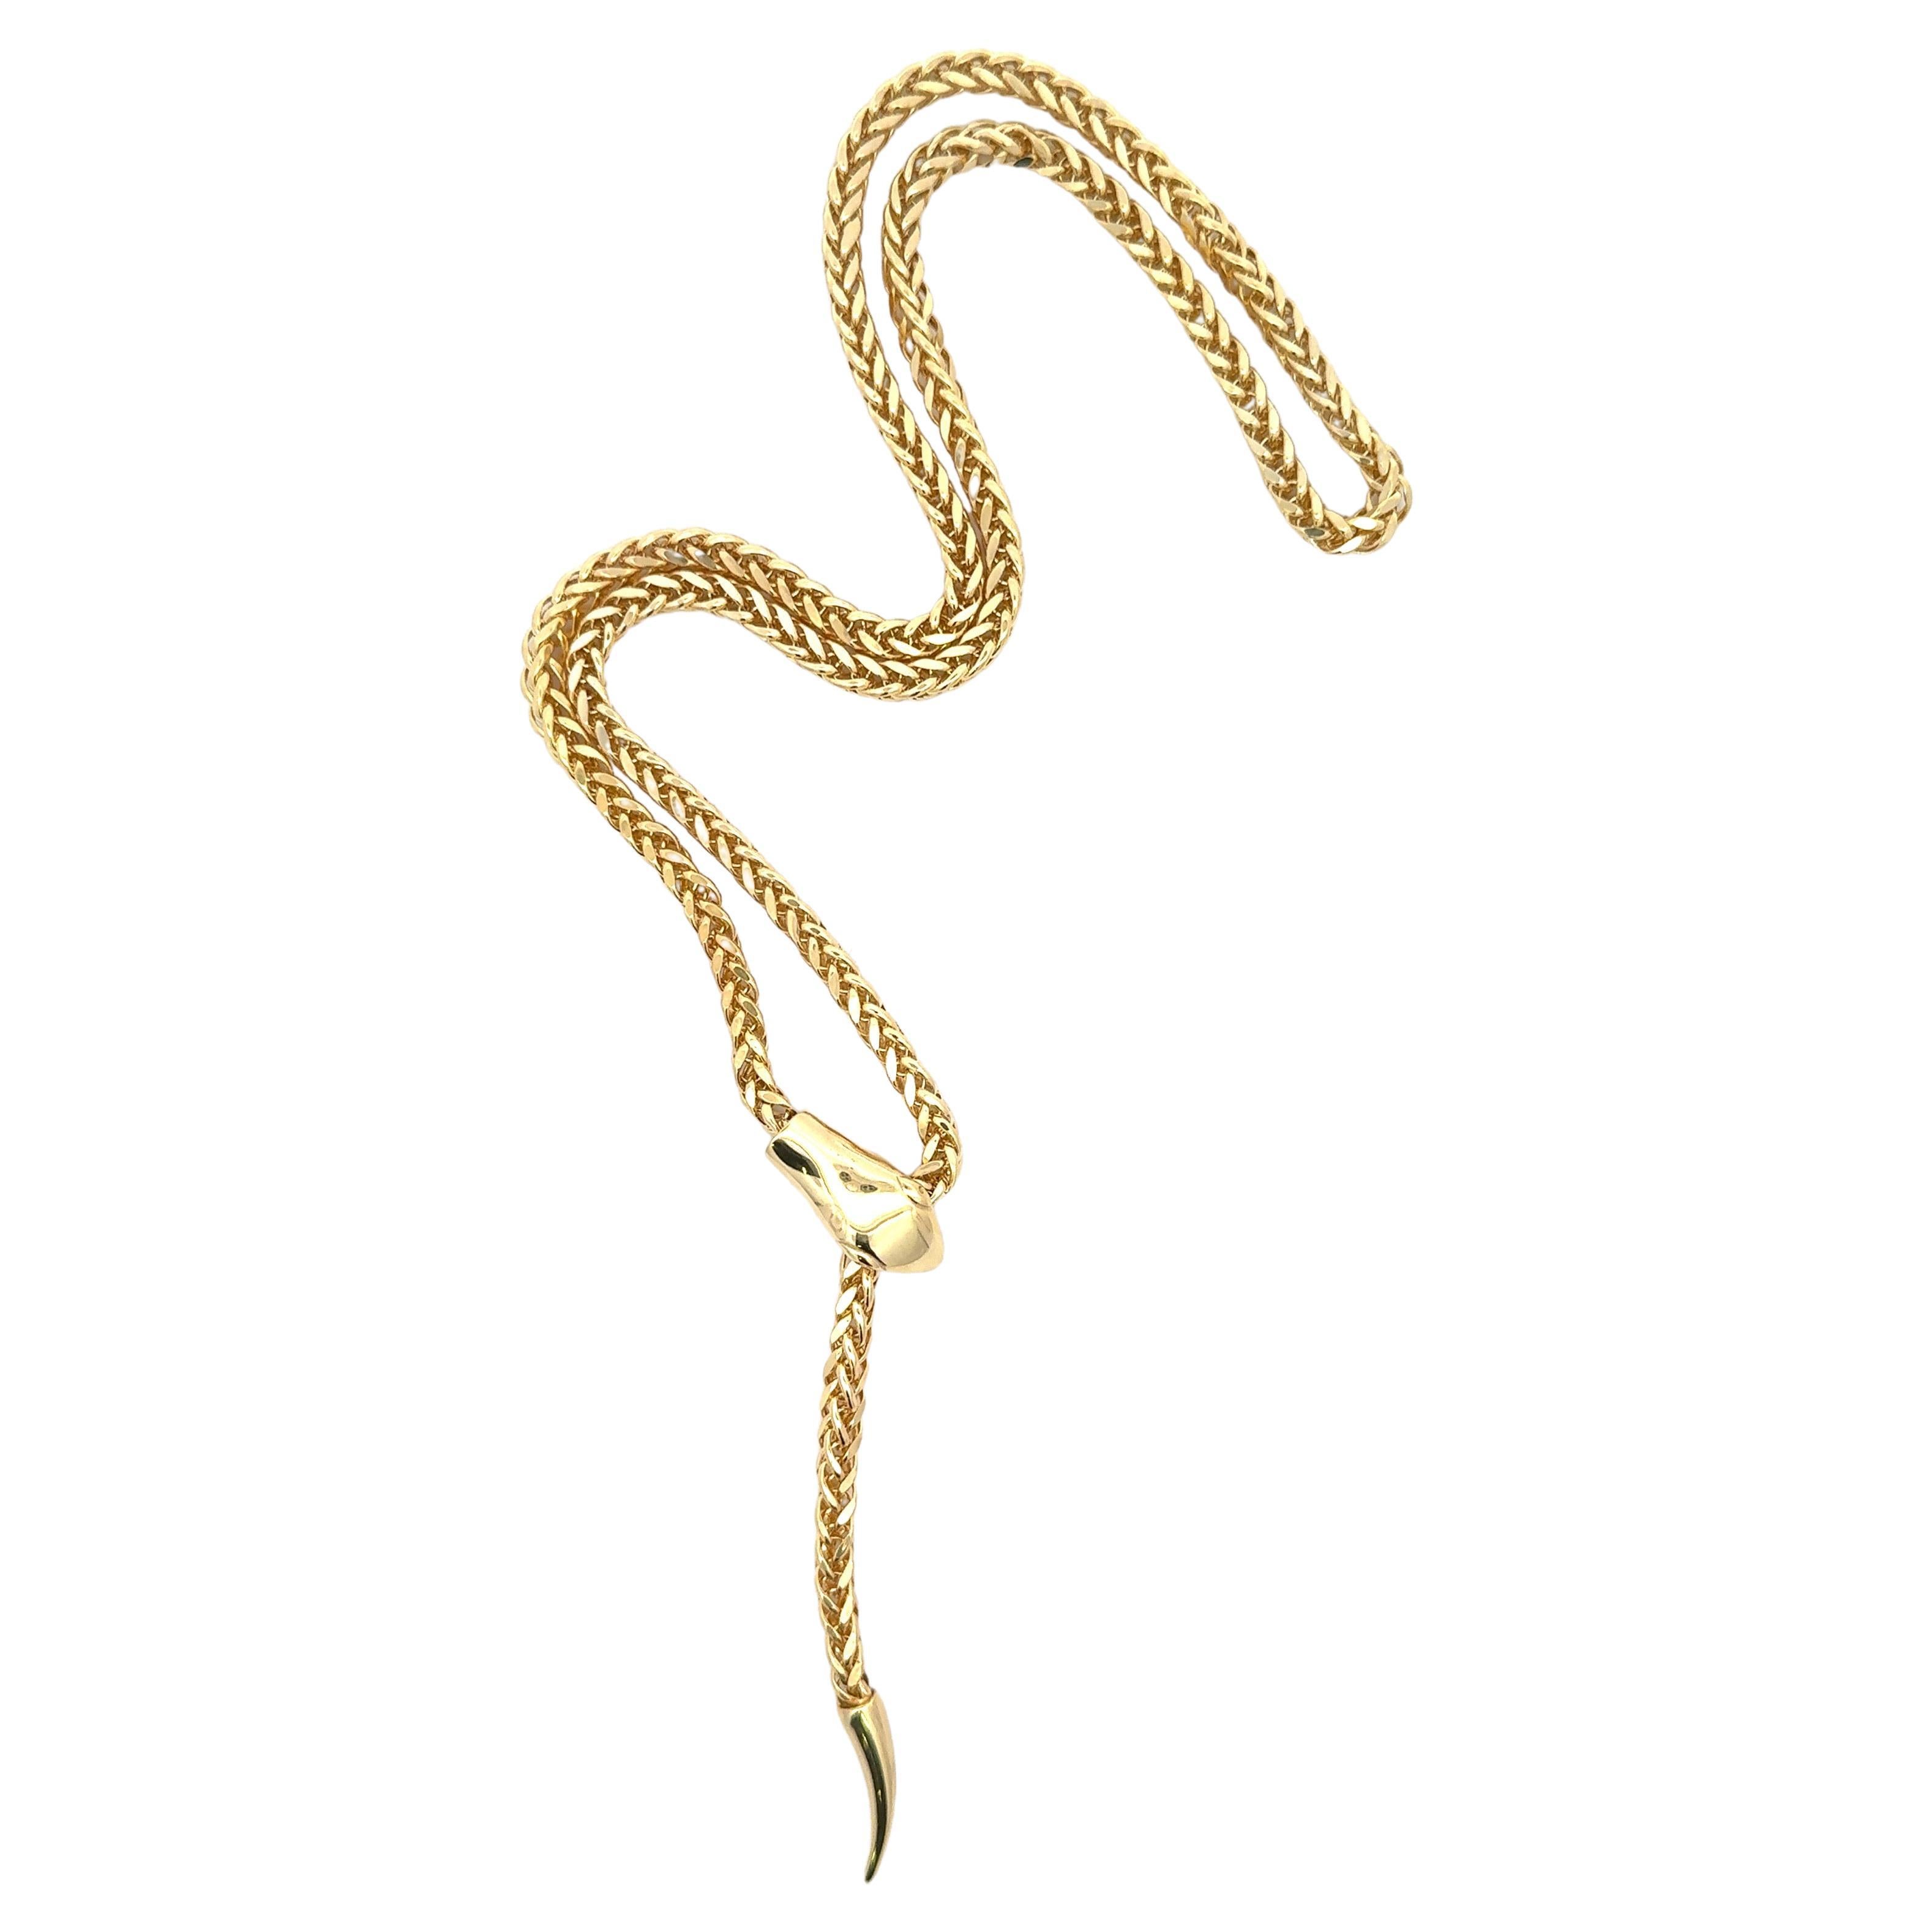 Italian Snake Motif Adjustable Lariat Necklace 14 Karat Yellow Gold 15 Grams In New Condition For Sale In New York, NY